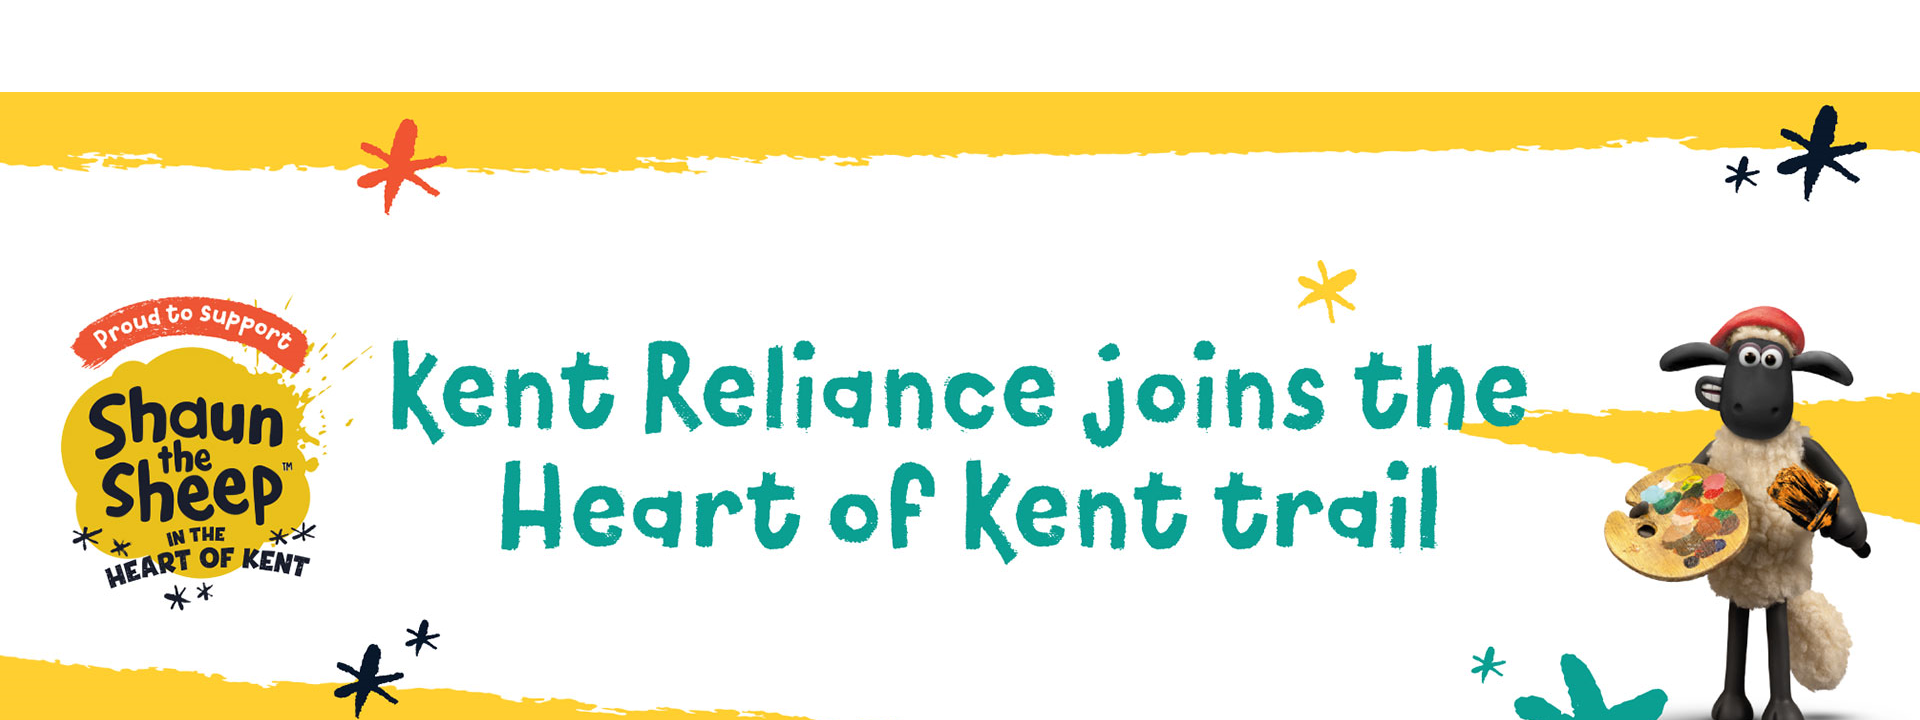 Kent Reliance joins the Heart of Kent trail